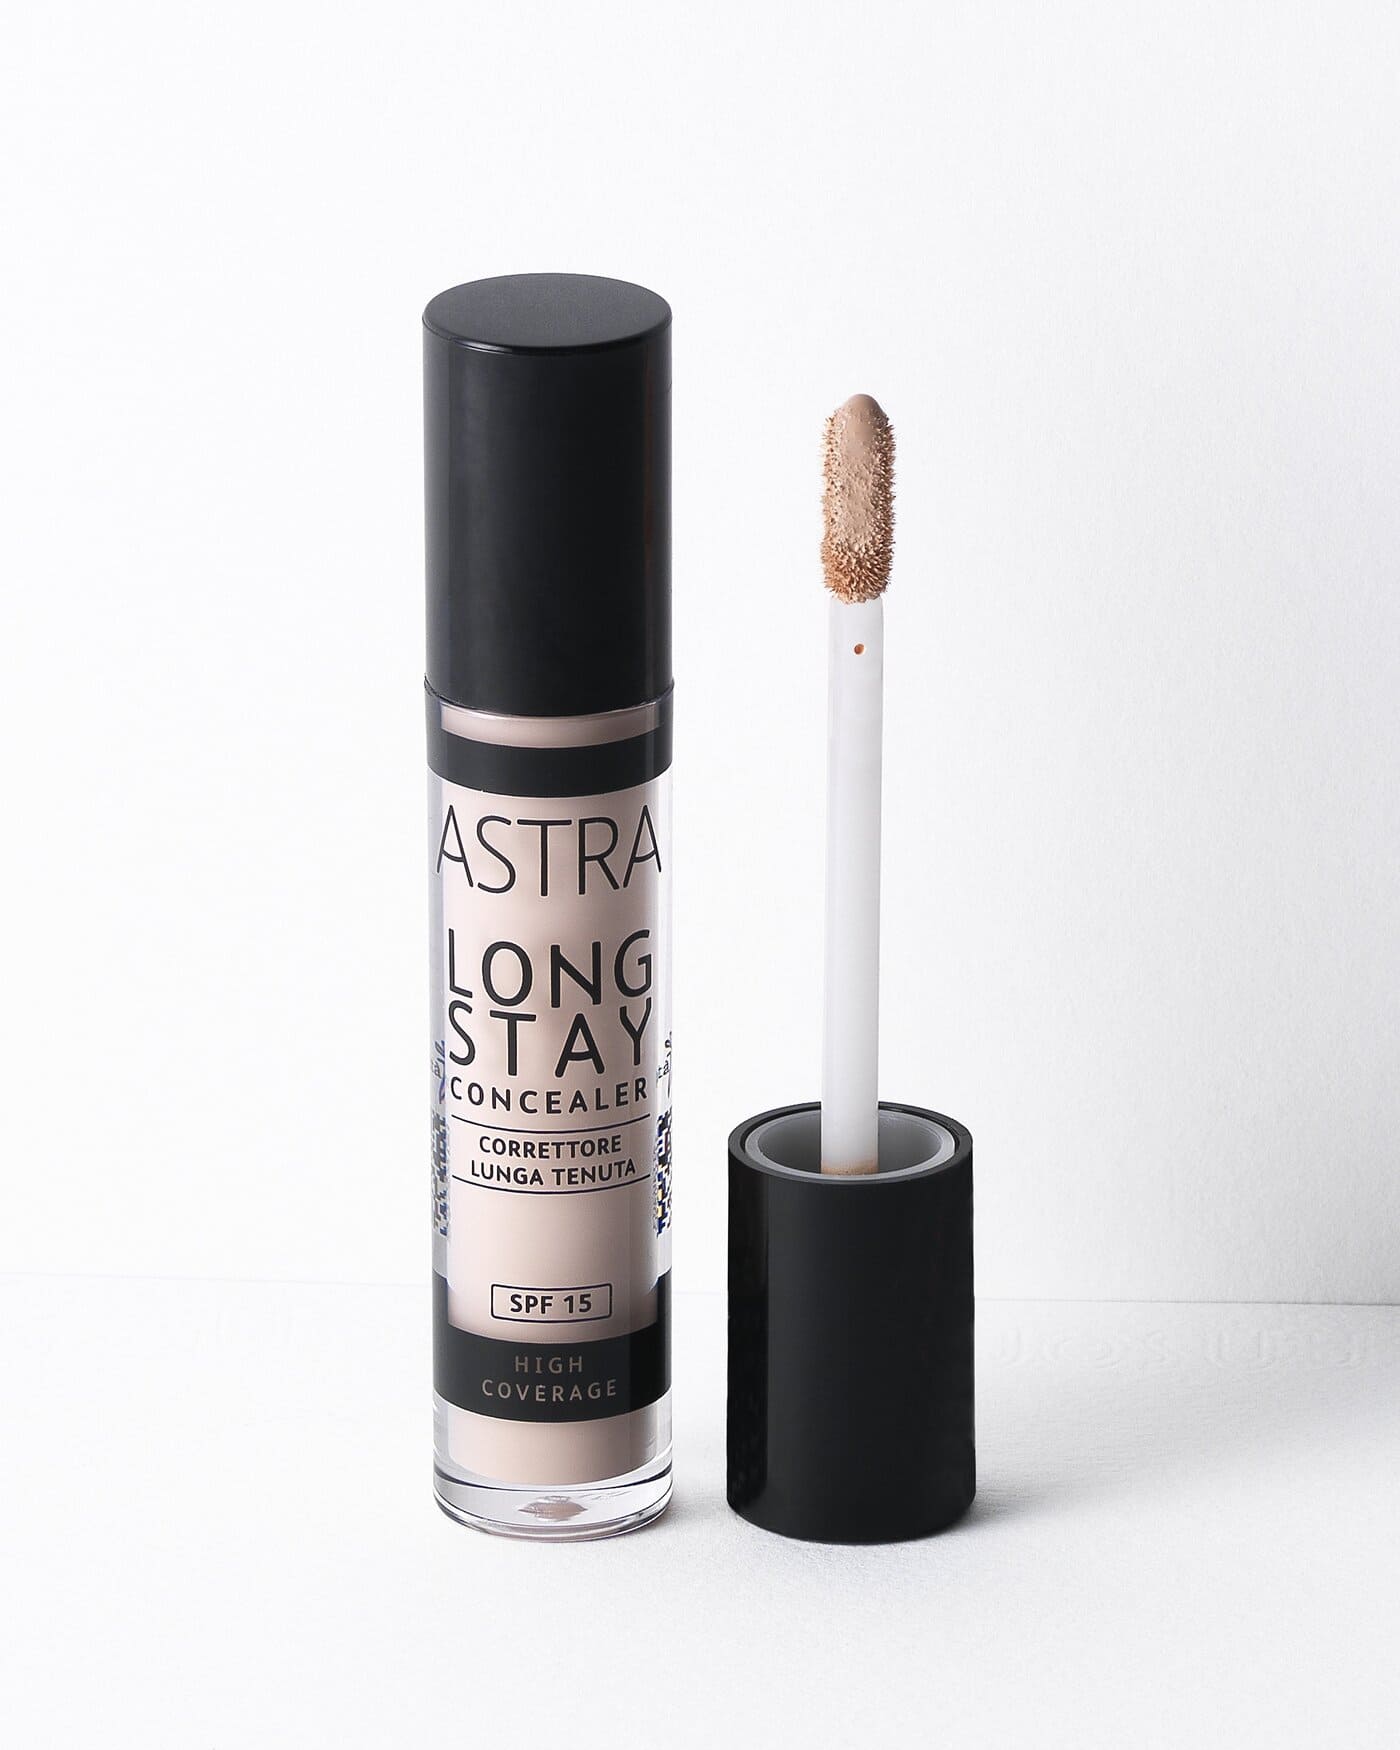 LONG STAY CONCEALER - Correttore Lunga Tenuta - 01C - Ivory - Astra Make-Up